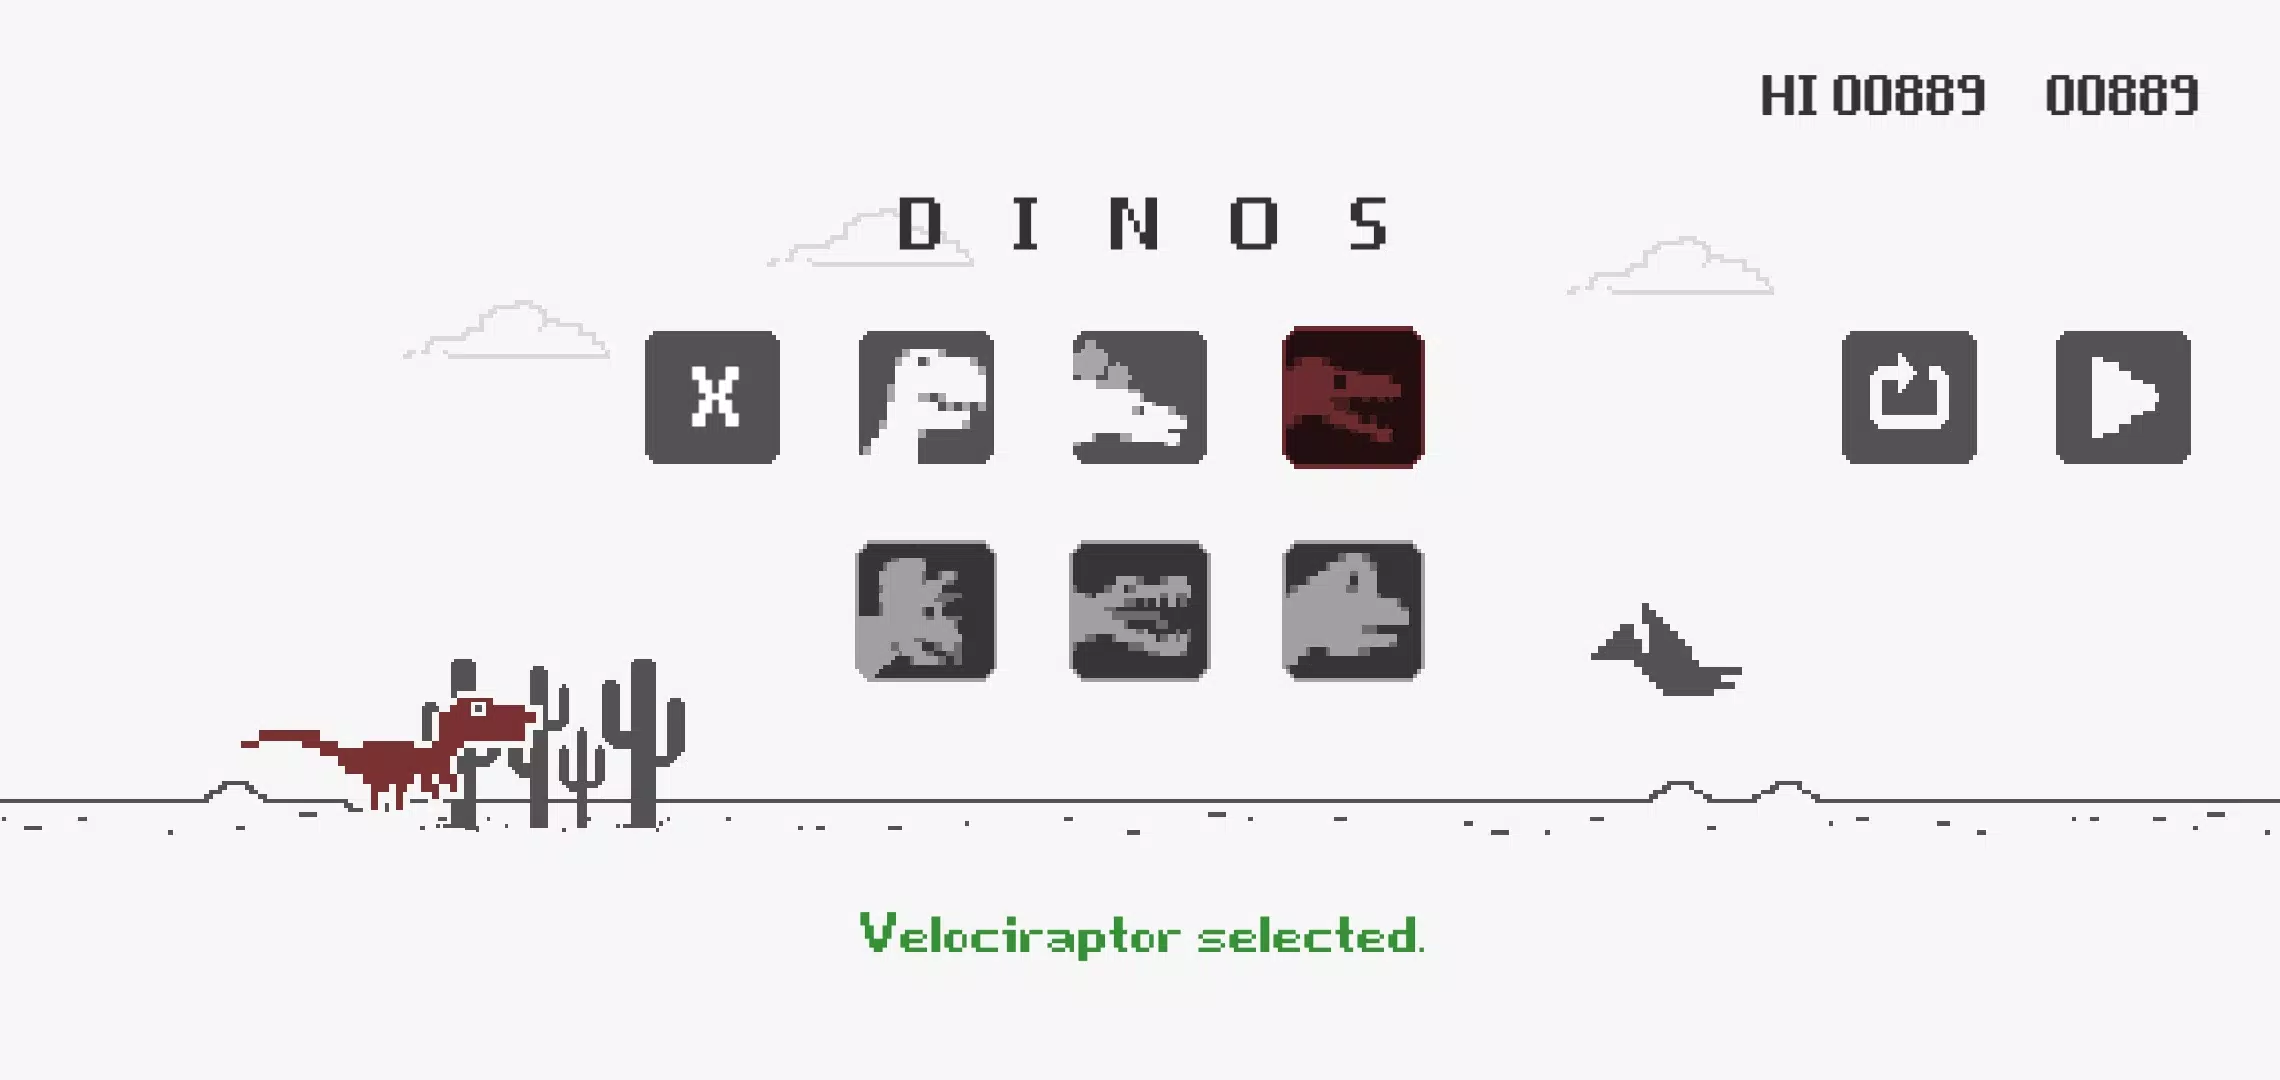 Color Dino Runner APK for Android Download